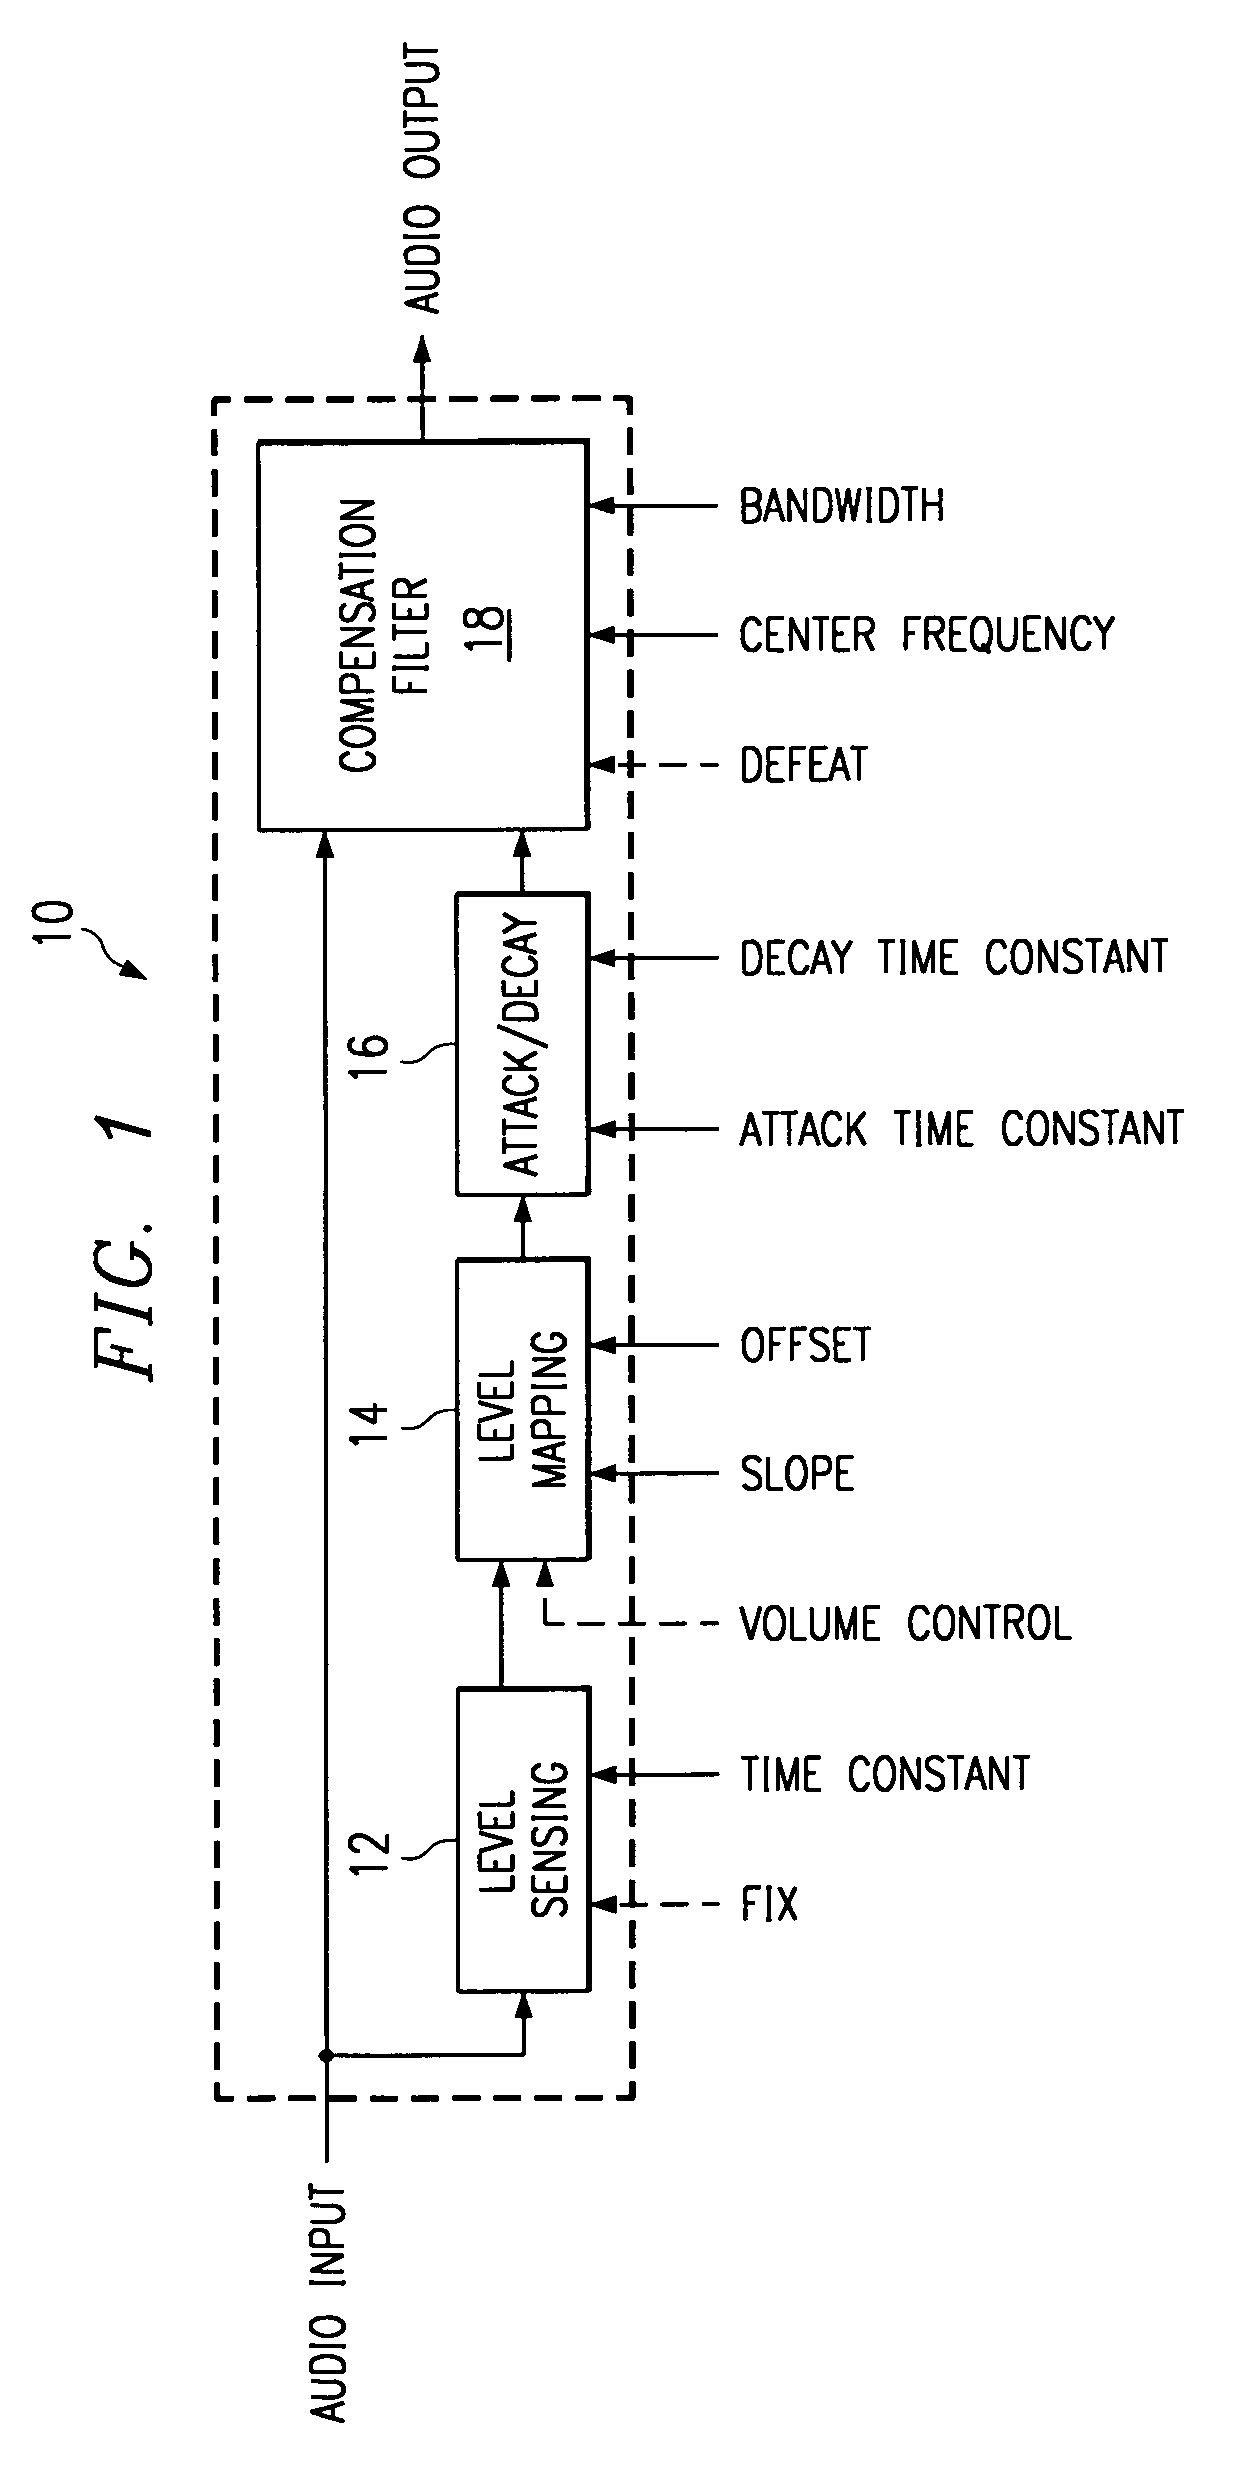 Configurable digital loudness compensation system and method